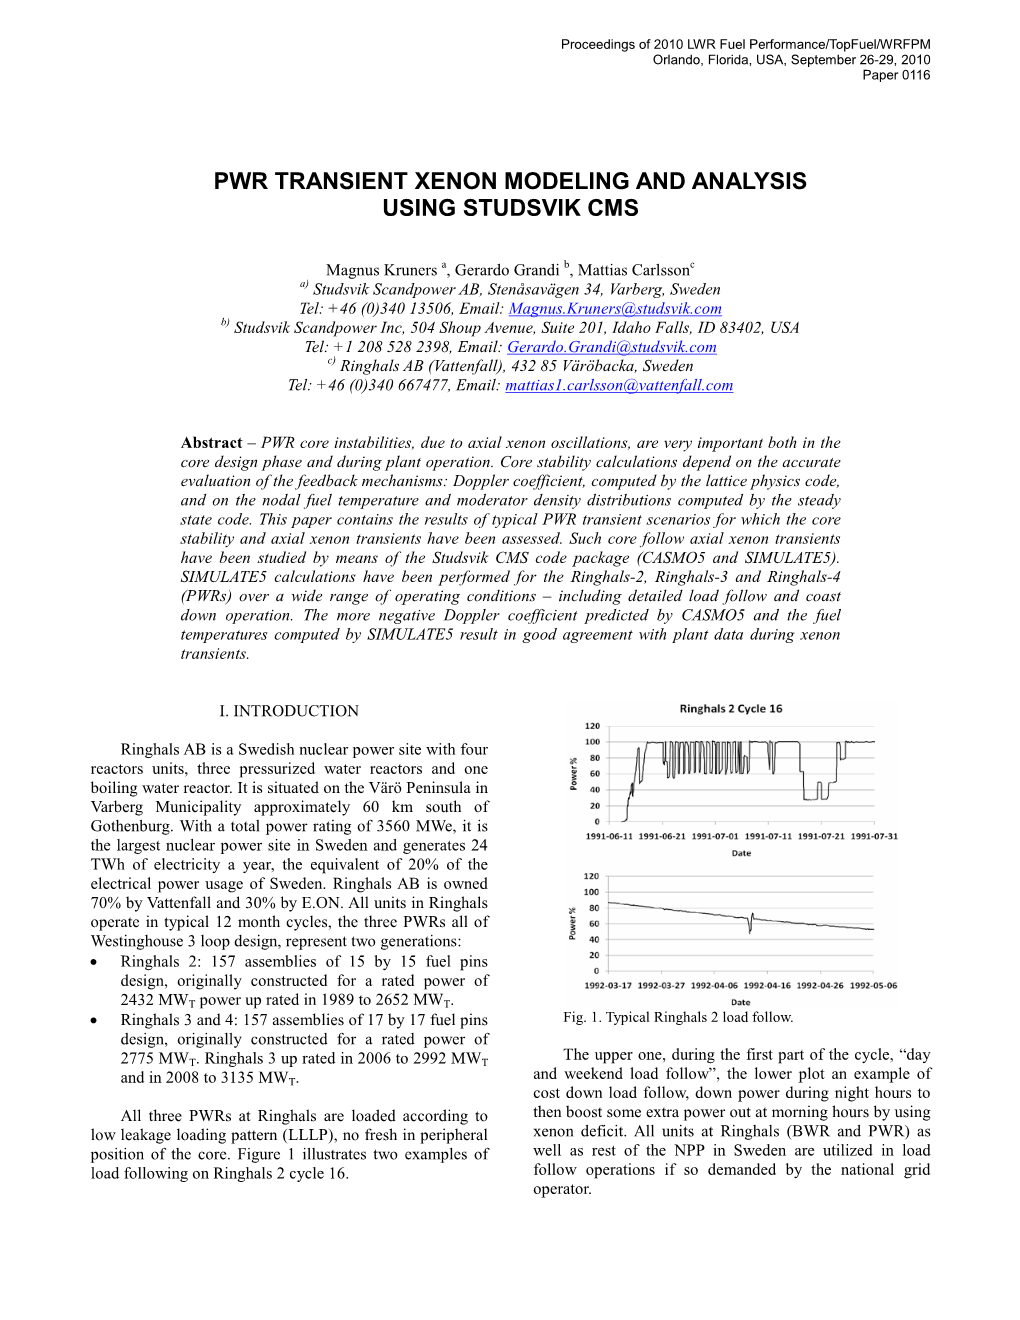 Pwr Transient Xenon Modeling and Analysis Using Studsvik Cms